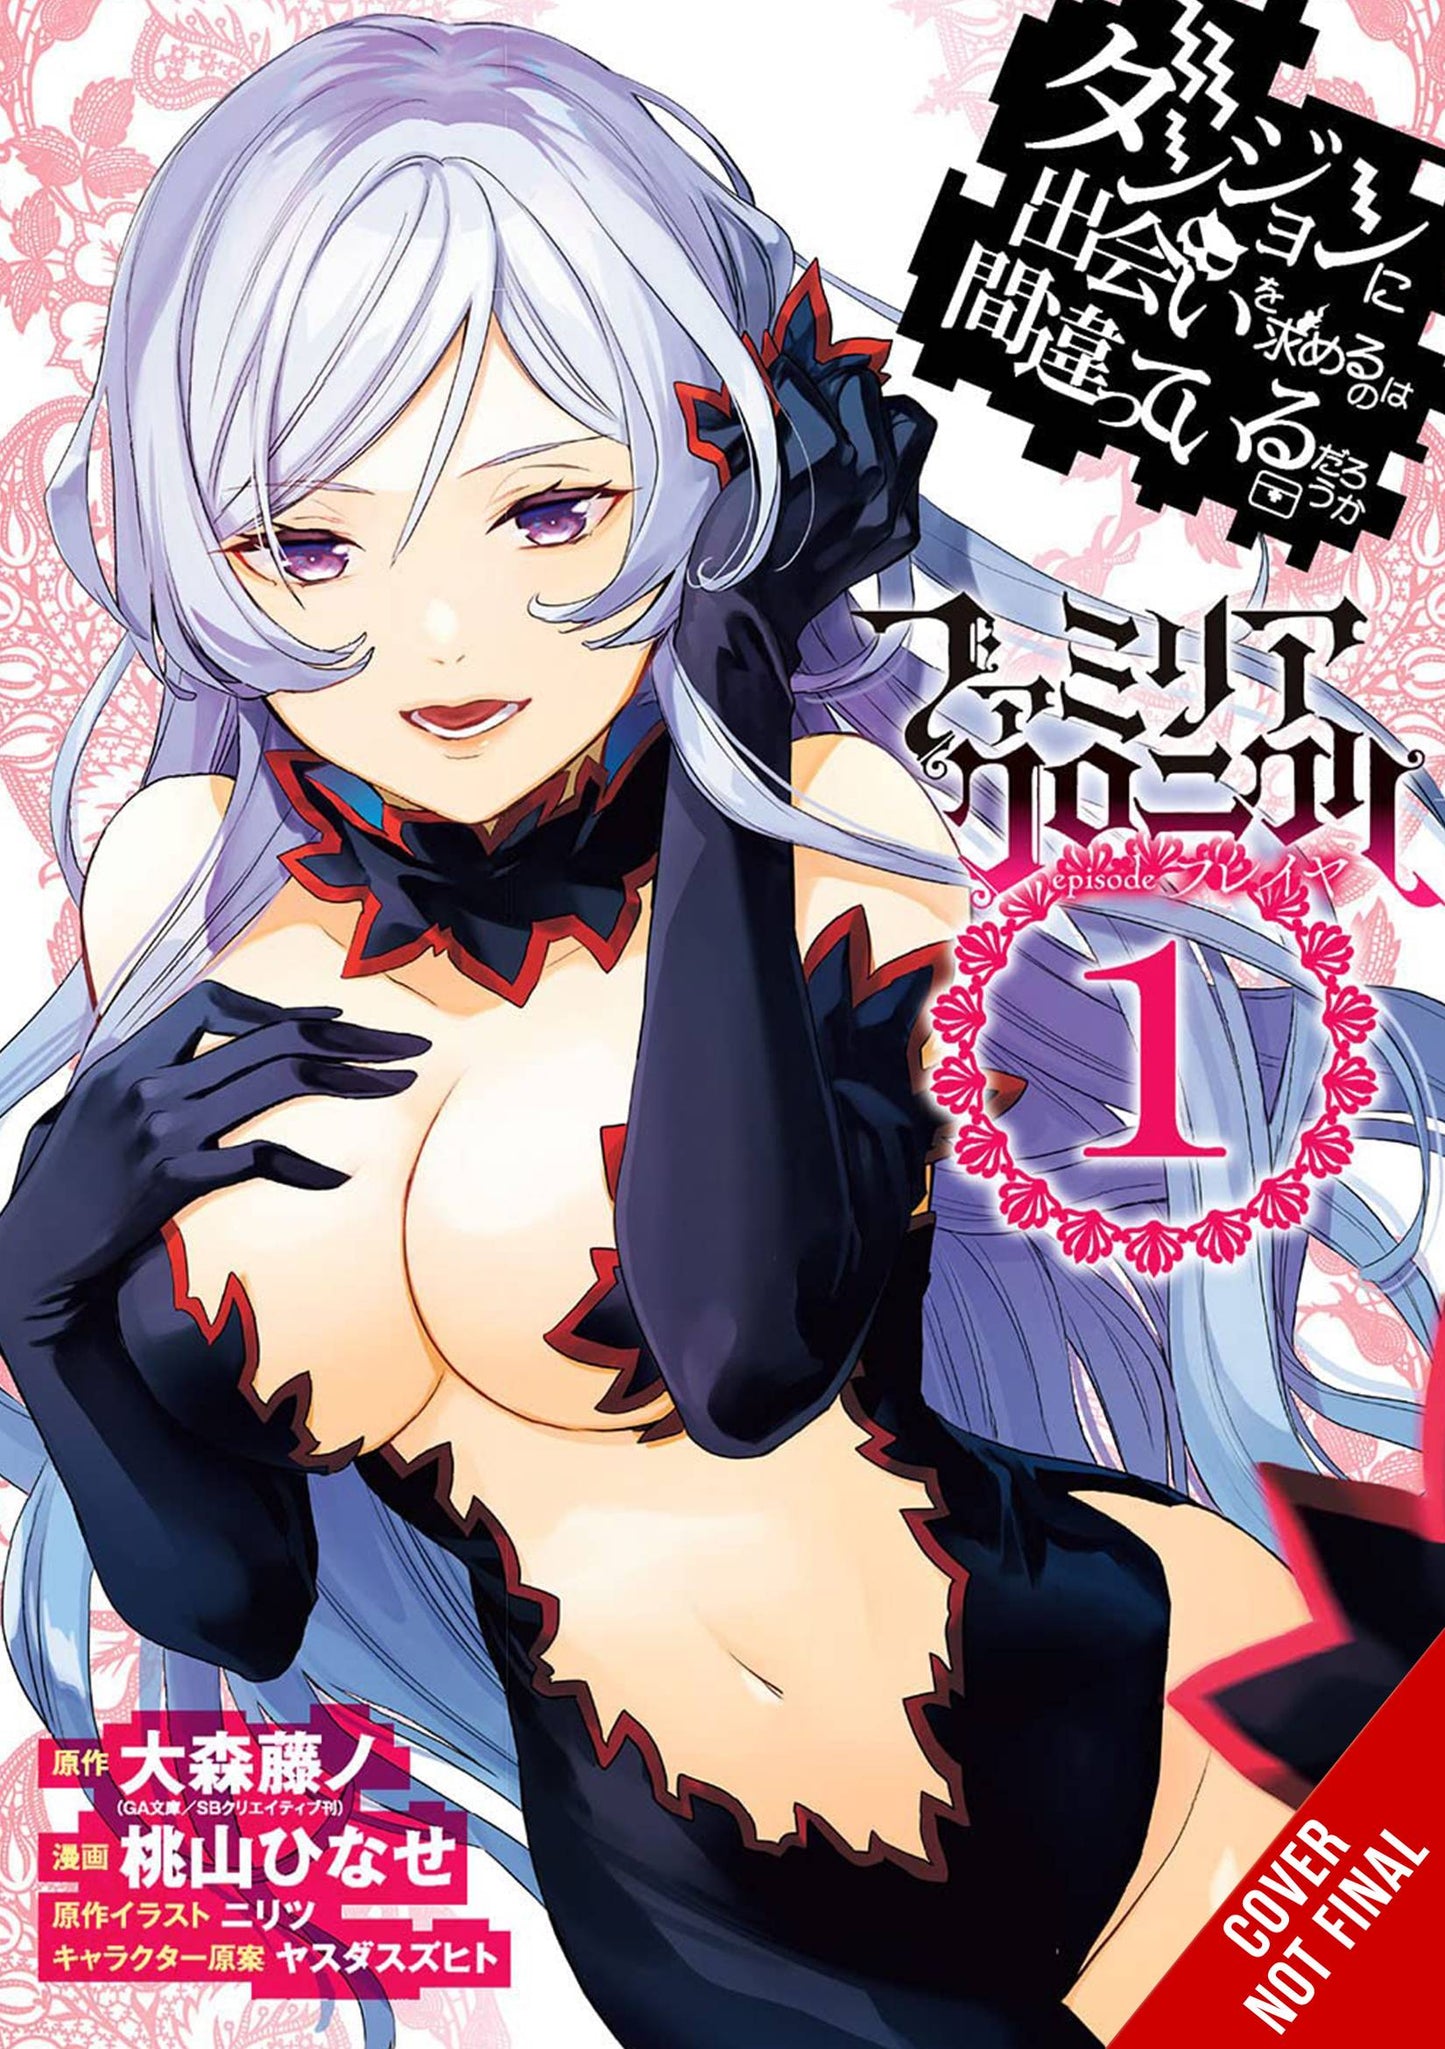 Is it Wrong to Pick up Girls in a Dungeon Familia Chronicle vol 1